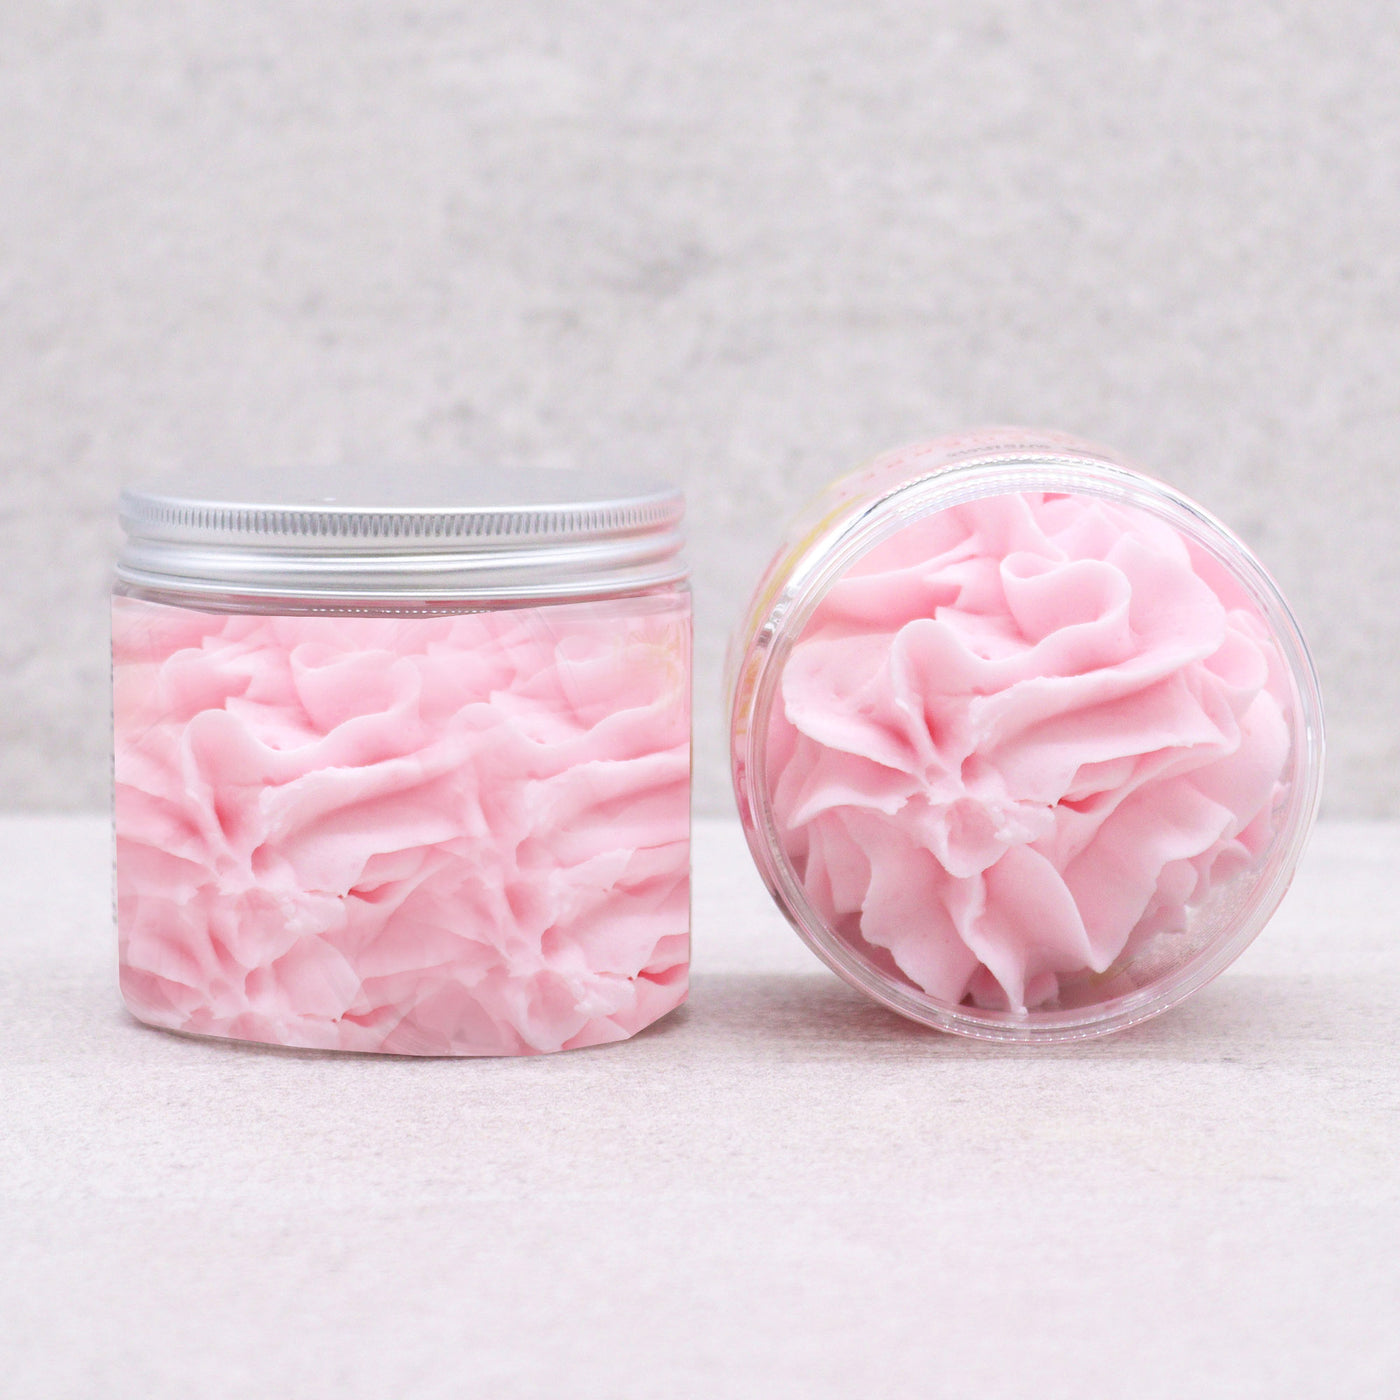 Indulge in Luxury with Whipped Creamy Pink Lemonade Sherbet Bath Soap - A Tangy Aroma 120g